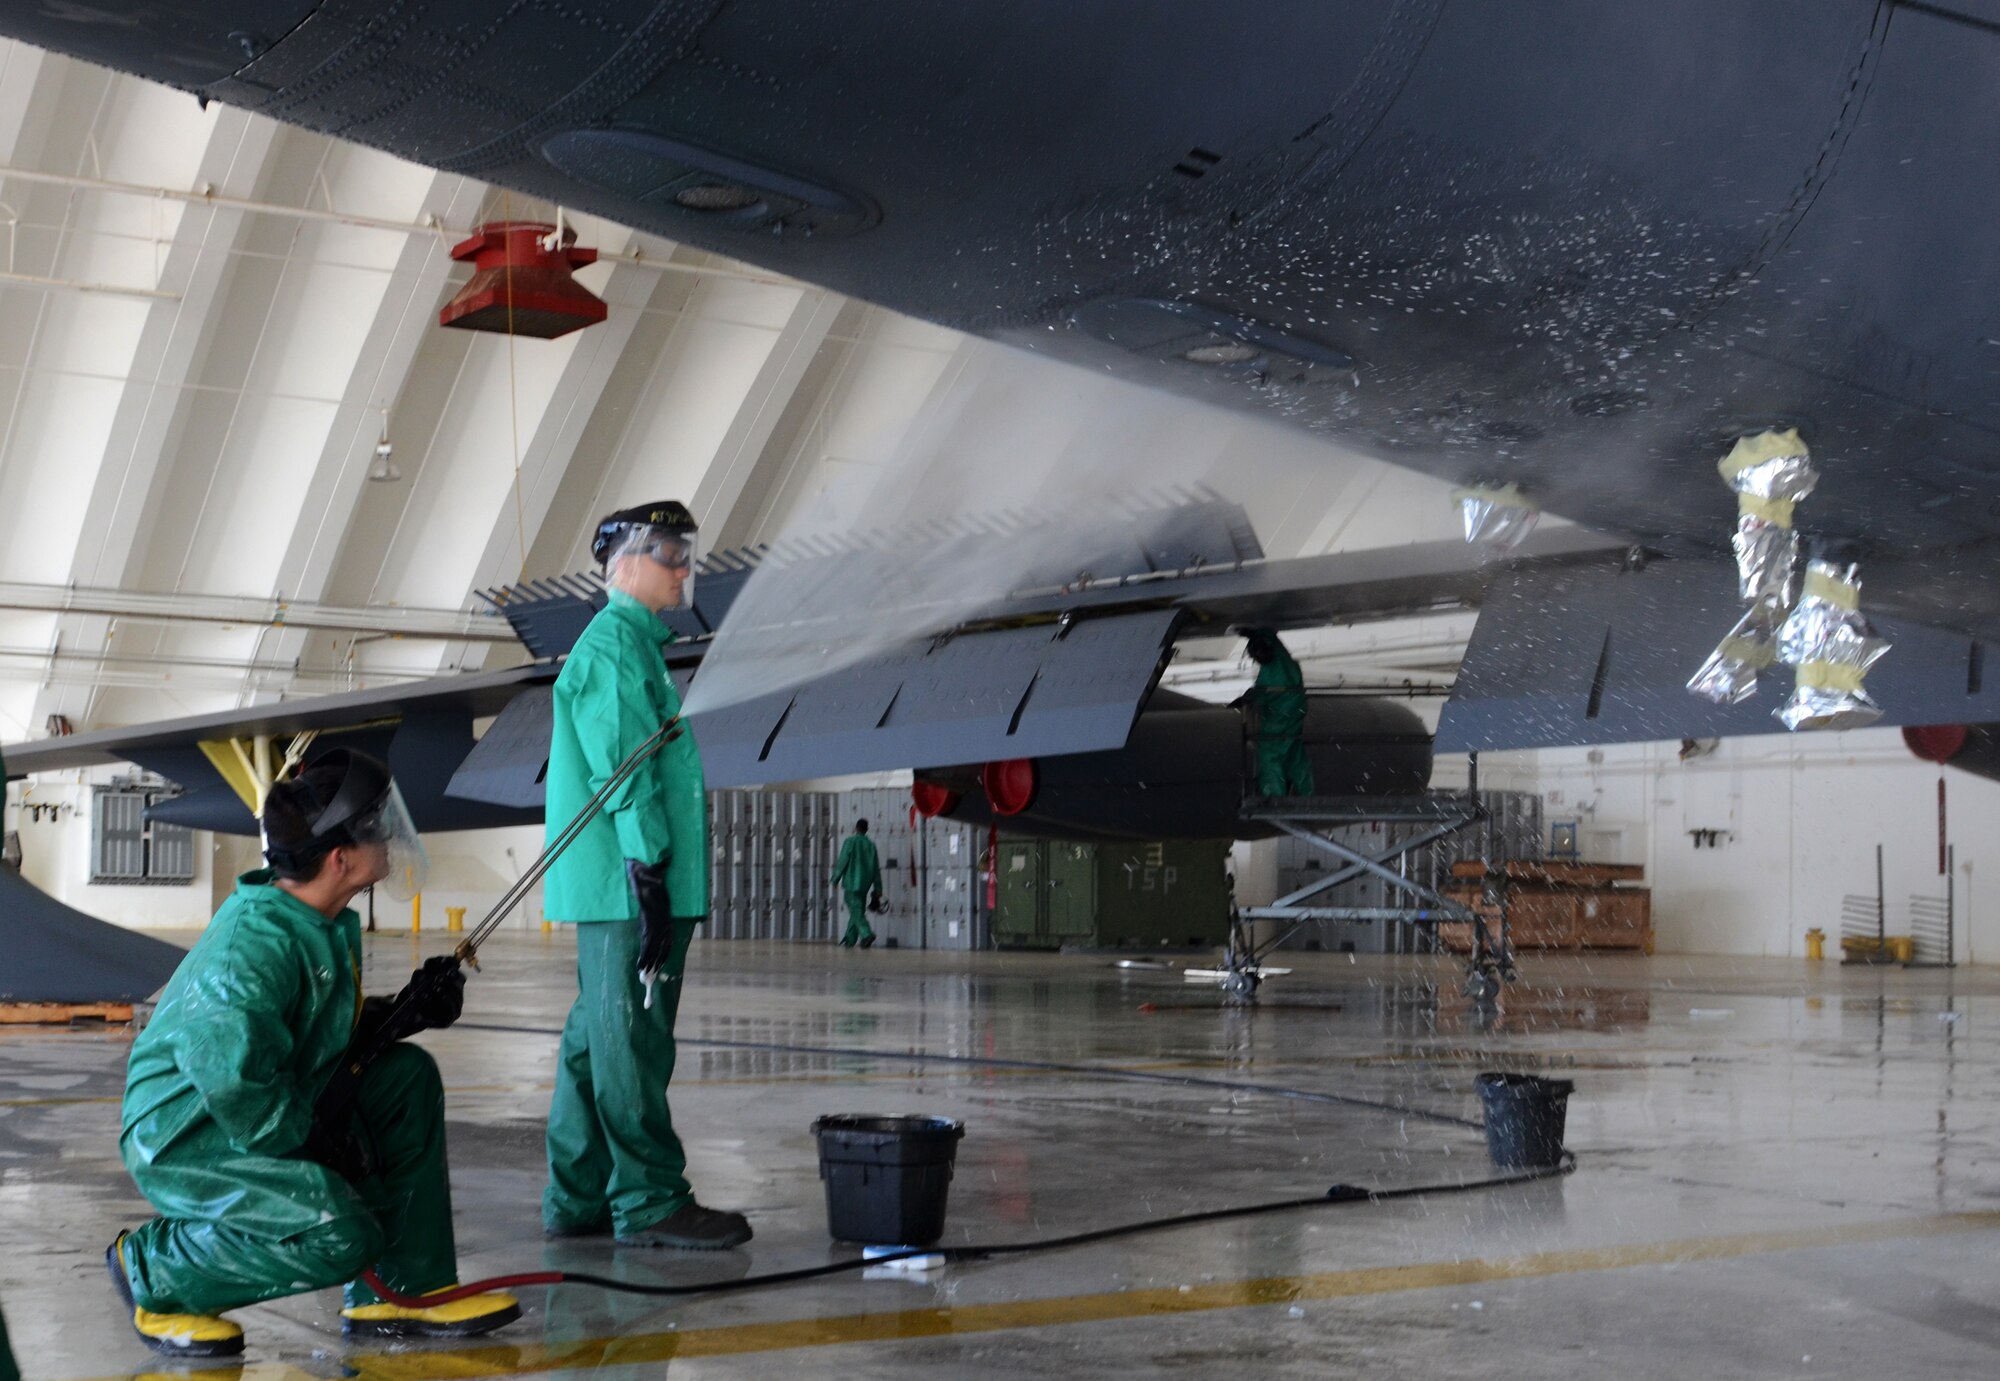 ANDERSEN AIR FORCE BASE, Guam— Airman 1st Class Christopher Rider (left) and Senior Airman Matthew Fernandez, 96th Expeditionary Aircraft Maintenance Unit weapons load technicians, finish spraying the bottom of a B-52 Stratofortress here, Nov. 15. Due to the corrosive environment on Guam, each B-52 is cleaned and lubricated every 30 days instead of the required 120 days.  (U.S. Air Force photo by Senior Airman Benjamin Wiseman/Released)